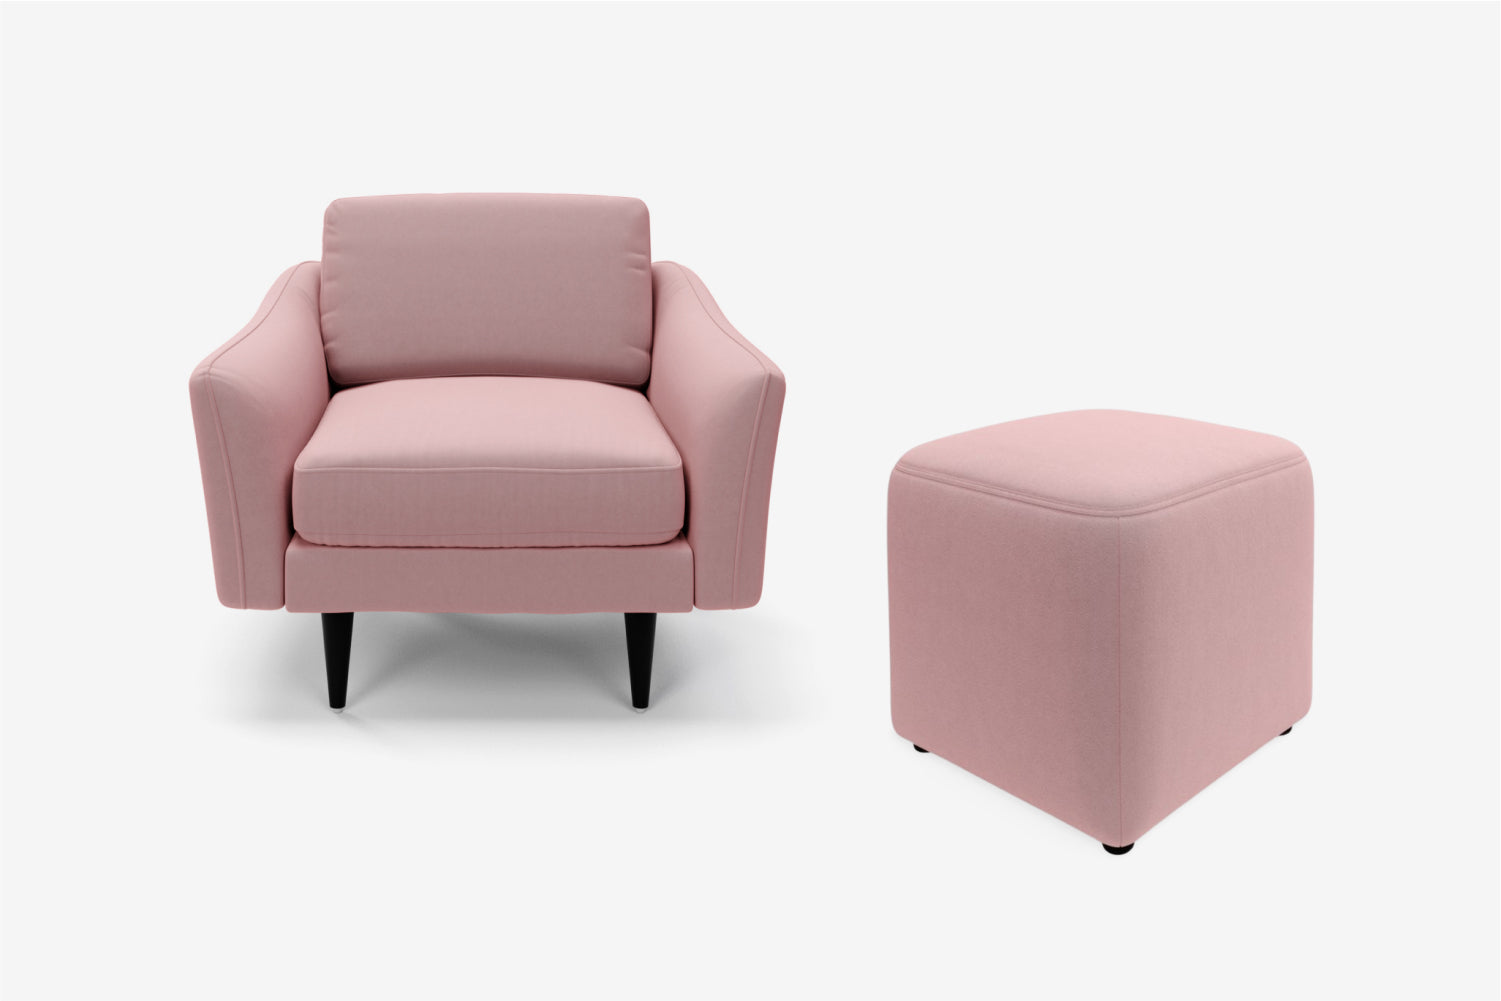 The Rebel - 1 Seater Armchair and Accent Stool Set - Blush